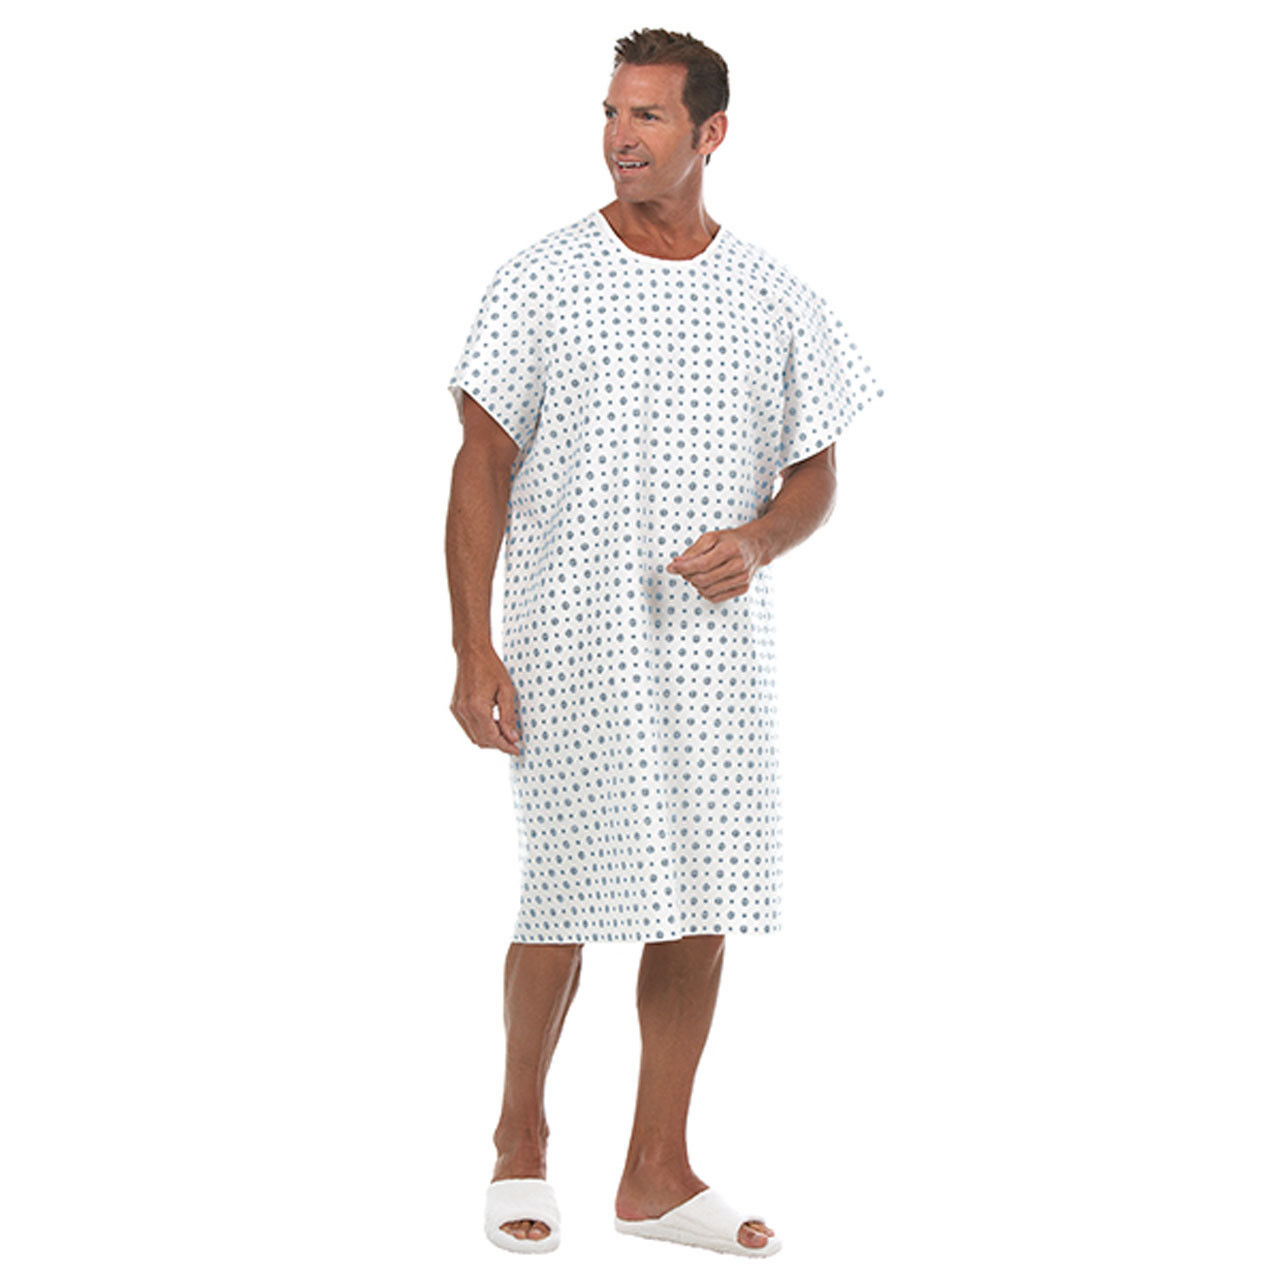 Wholesale Hospital Gowns by Fashion Seal, - In Bulk Case of 12 or 36 Questions & Answers